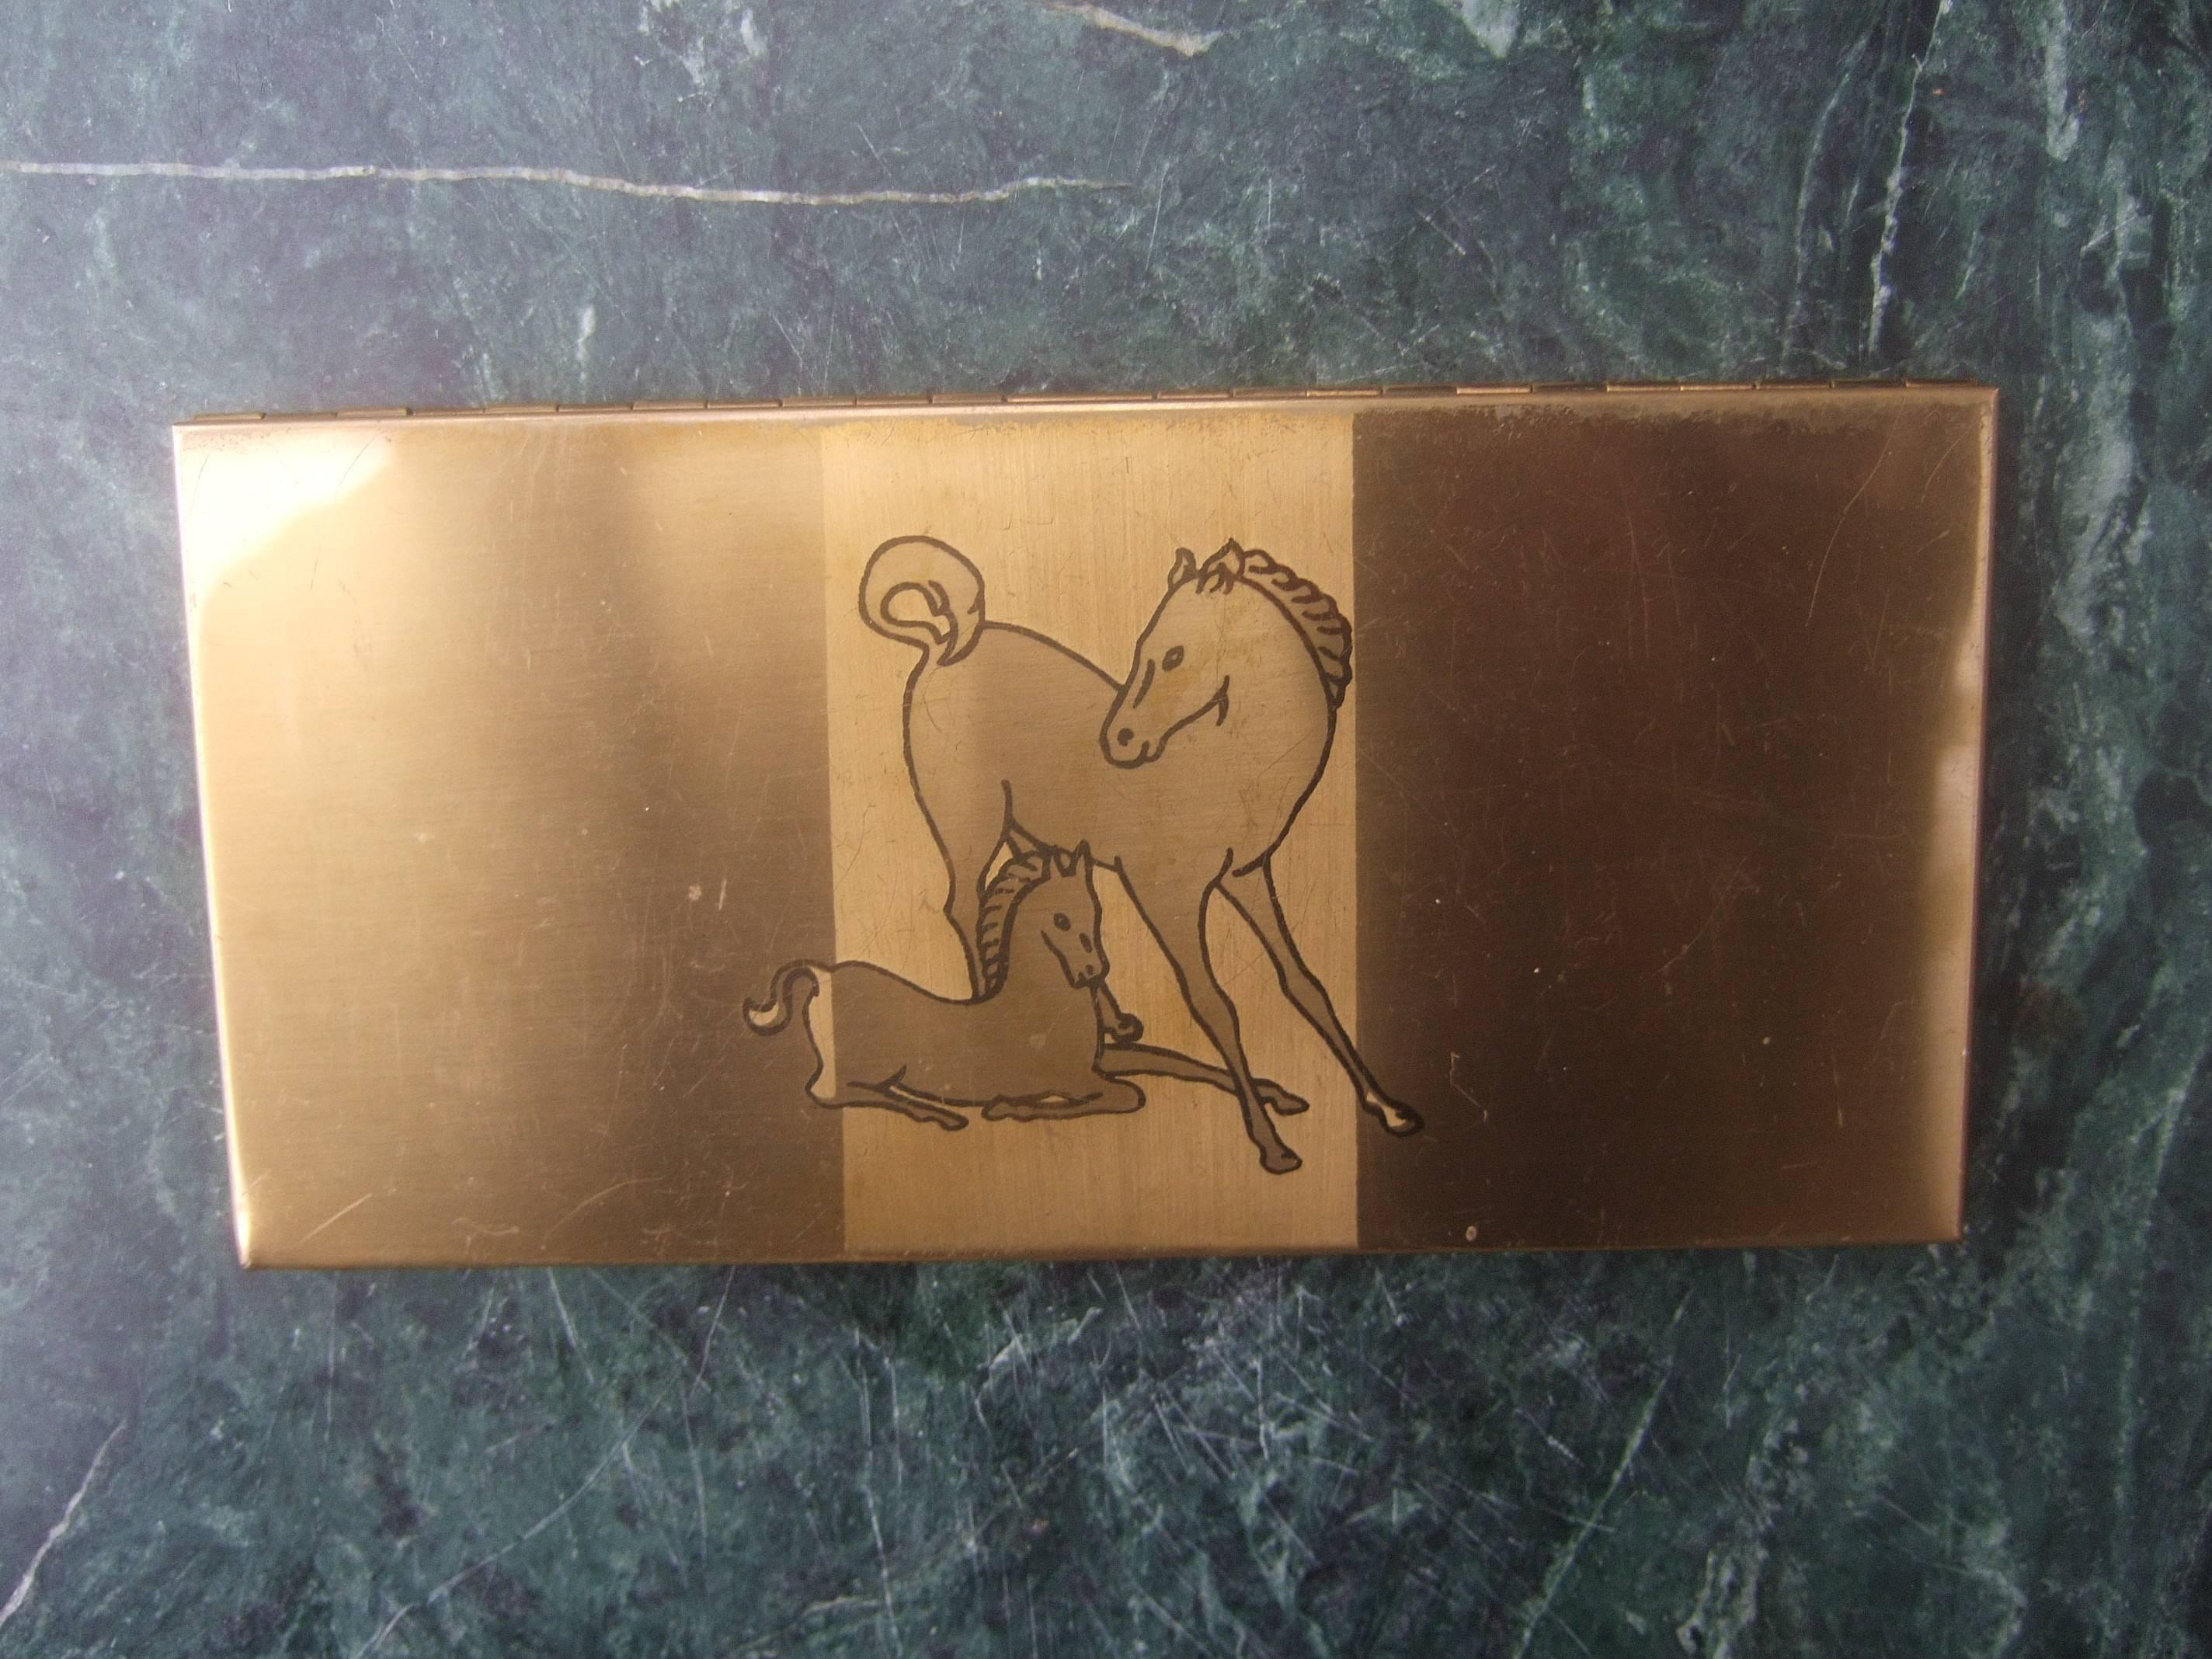 Mid-century brass metal equine cigarette case c 1960
The stylish retro cigarette case is designed with a horse
and colt offspring on the lid cover

The pair of equine are illuminated in silhouette against
a brushed satin brass metal background 
The